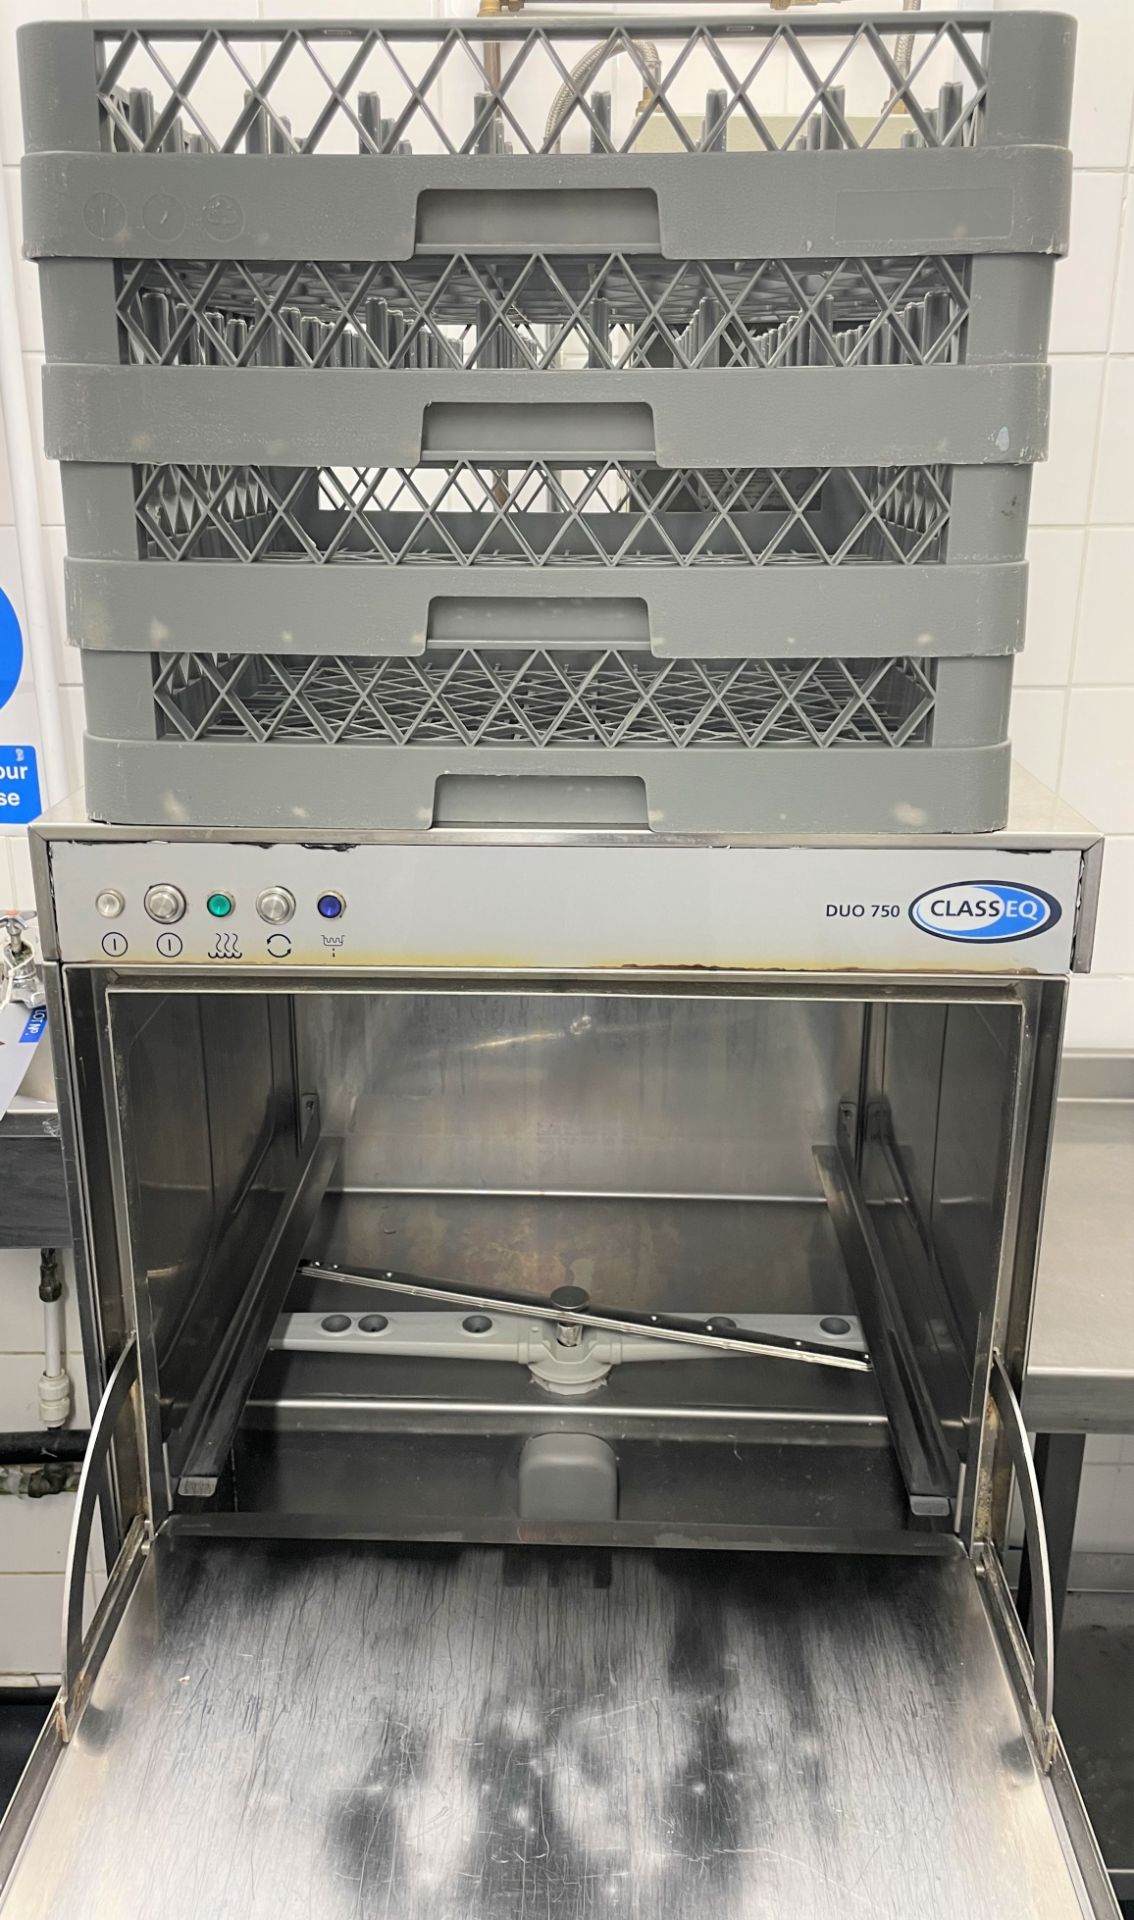 A ClassEQ DUO750 Dishwasher on stand with 4 baskets. - Image 2 of 2